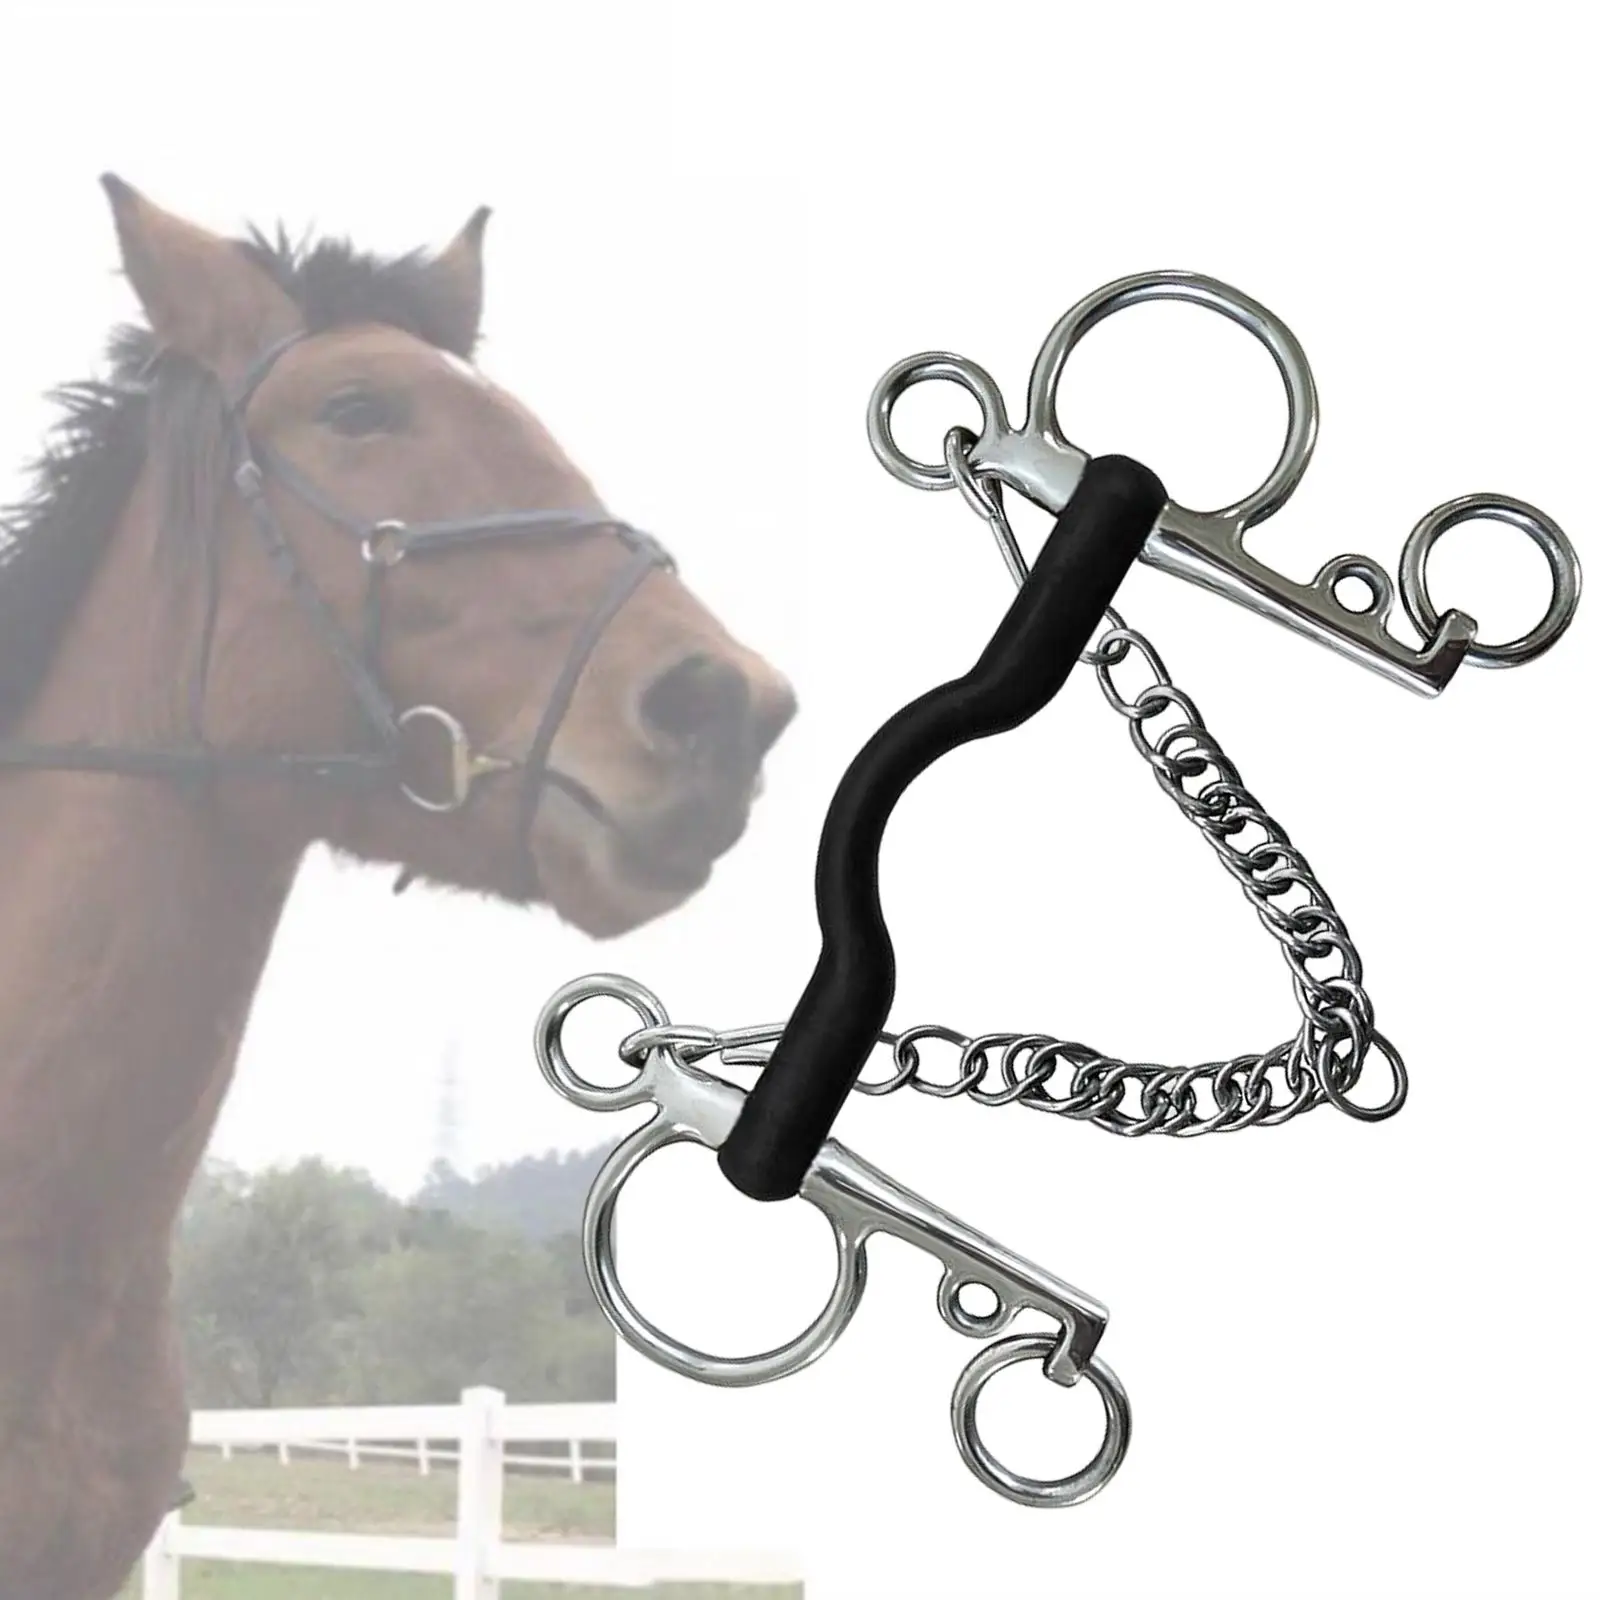 Western Style Horse Bit with Curb Hooks Chain Mouth Stainless Steel Harness Cheek for Horse Chewing equestrian